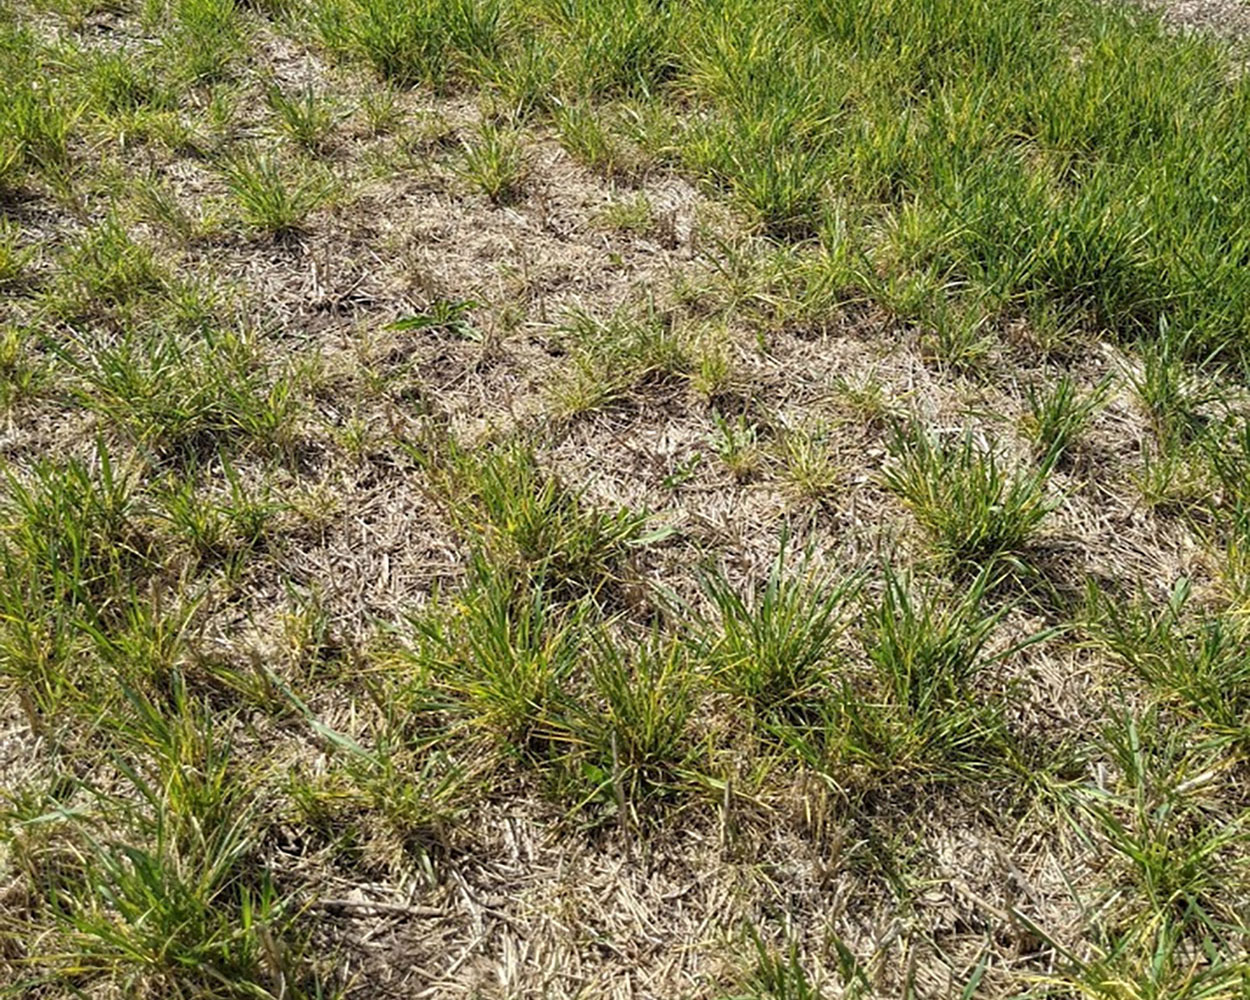 A portion of a fallow wheat field showing volunteer wheat from previous season with yellowing symptoms due to wheat streak mosaic virus. Such a field serves as a source of infested wheat curl mites that transmit wheat streak mosaic virus to newly planted wheat.